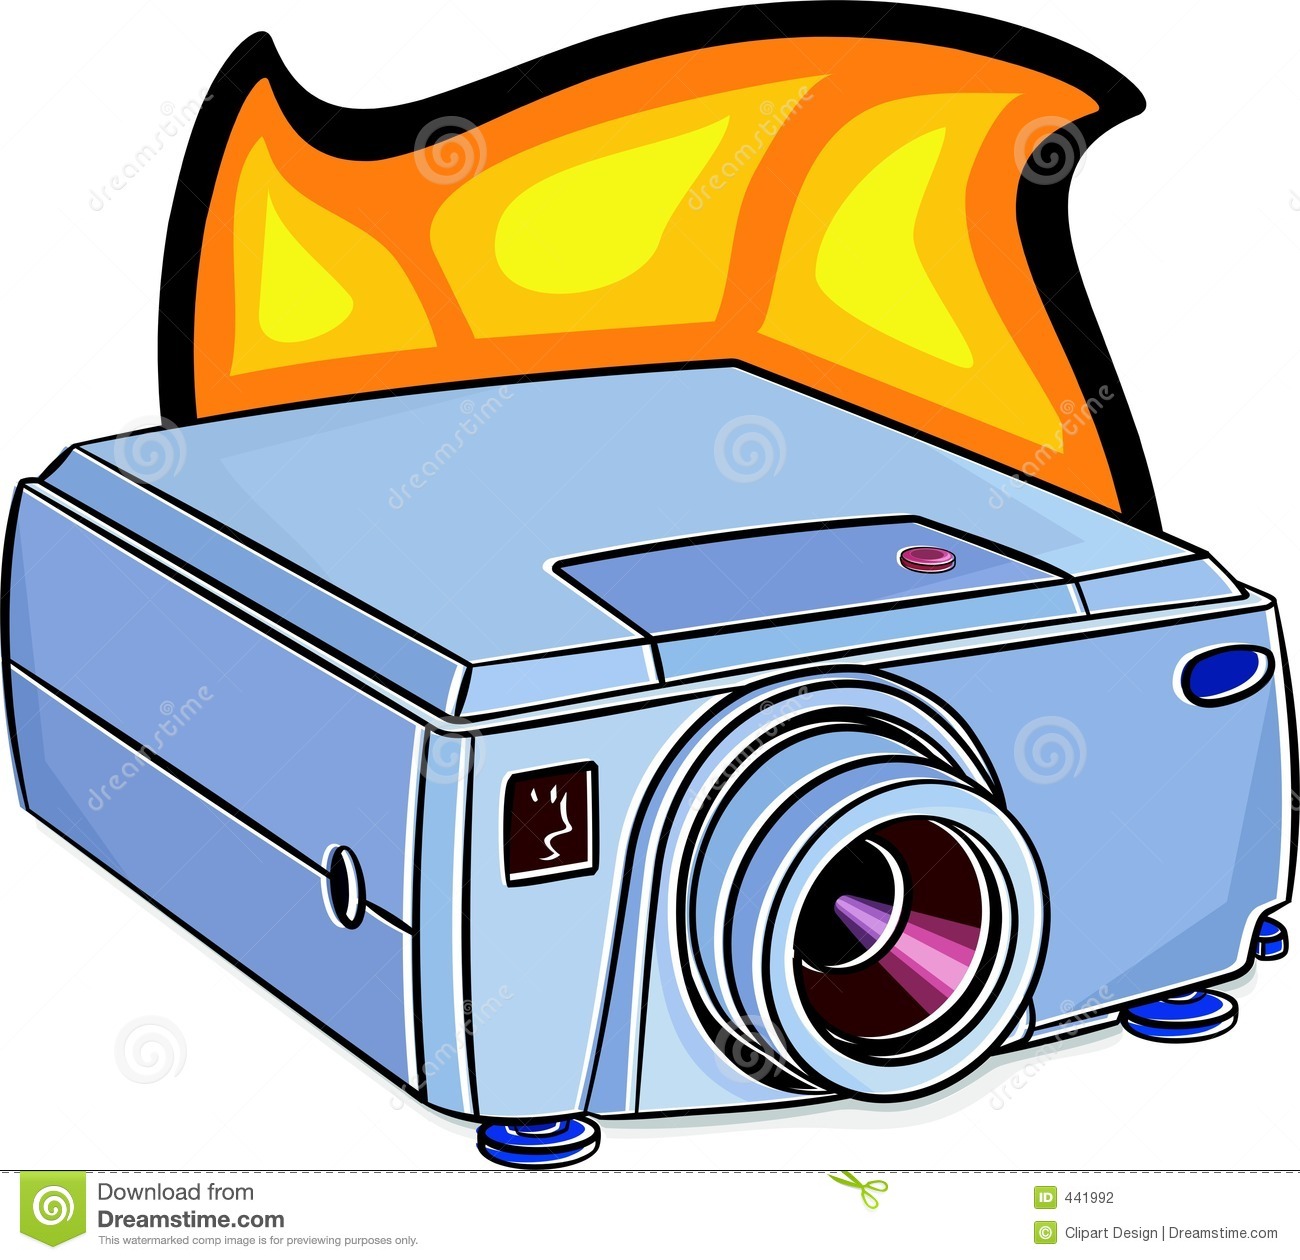 Projector Clipart   Clipart Panda   Free Clipart Images